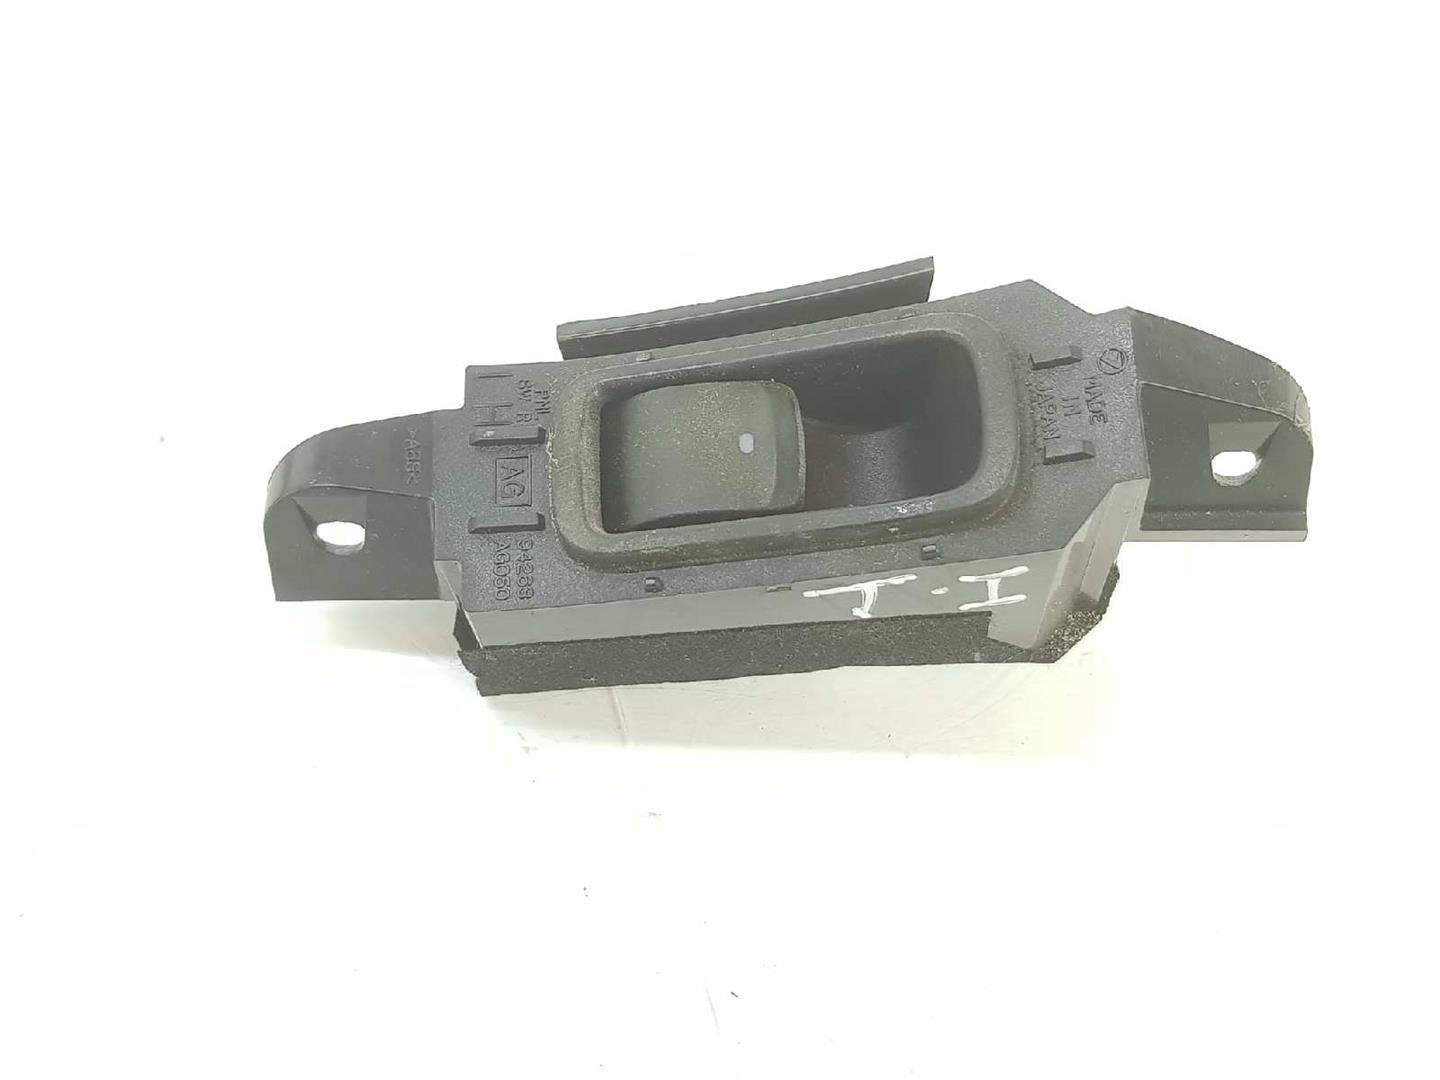 SUBARU Outback 3 generation (2003-2009) Rear Right Door Window Control Switch 83071AG040, 83071AG040 24118312